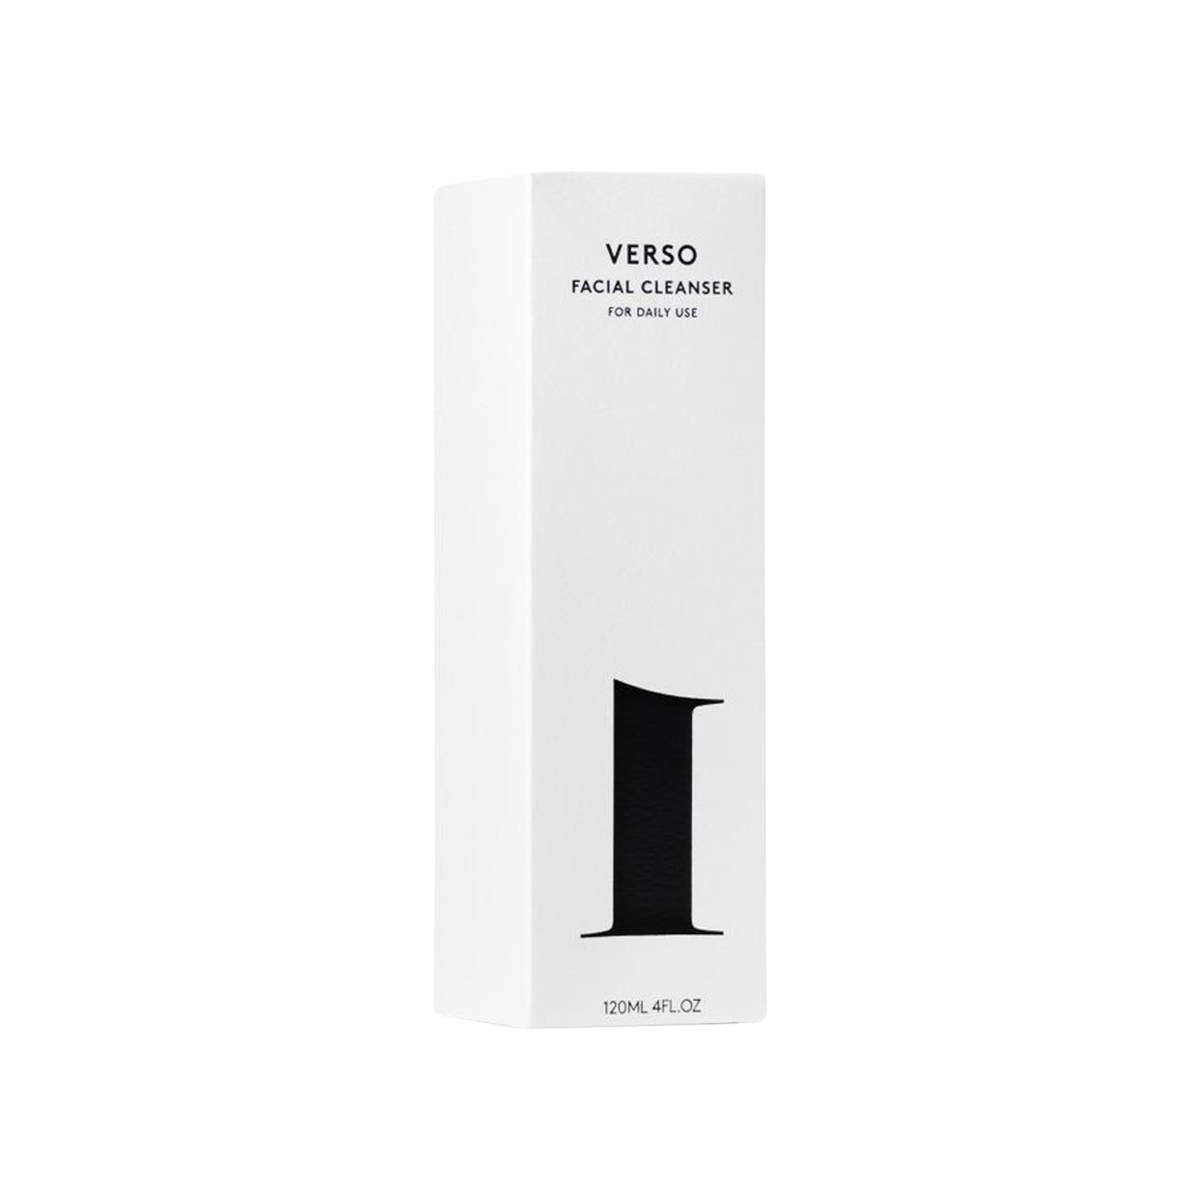 Verso - Facial Cleanser for daily use